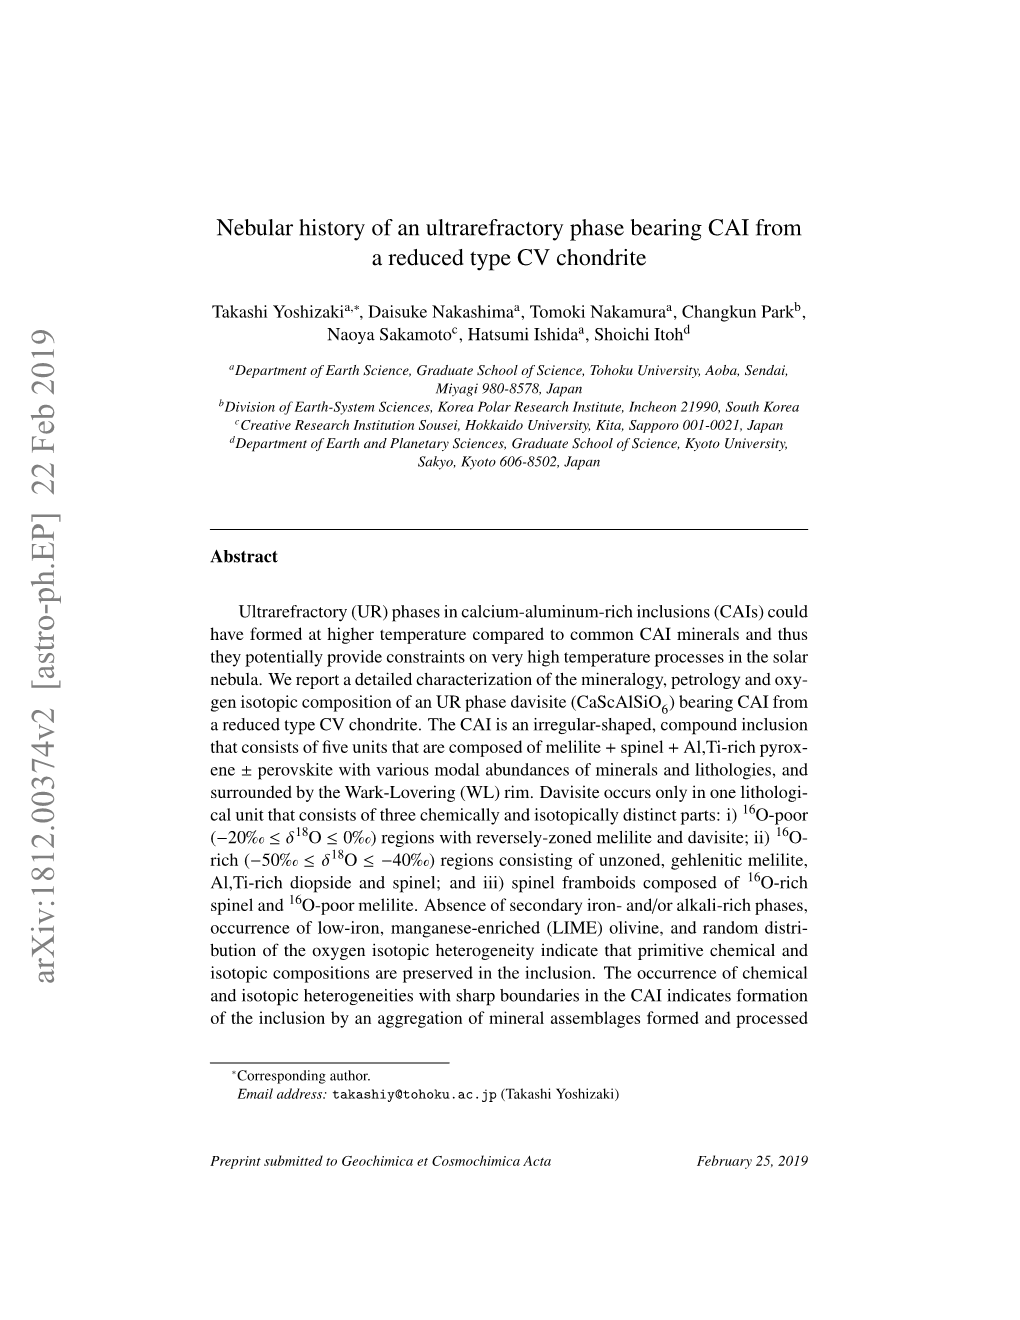 Nebular History of an Ultrarefractory Phase Bearing CAI from a Reduced Type CV Chondrite